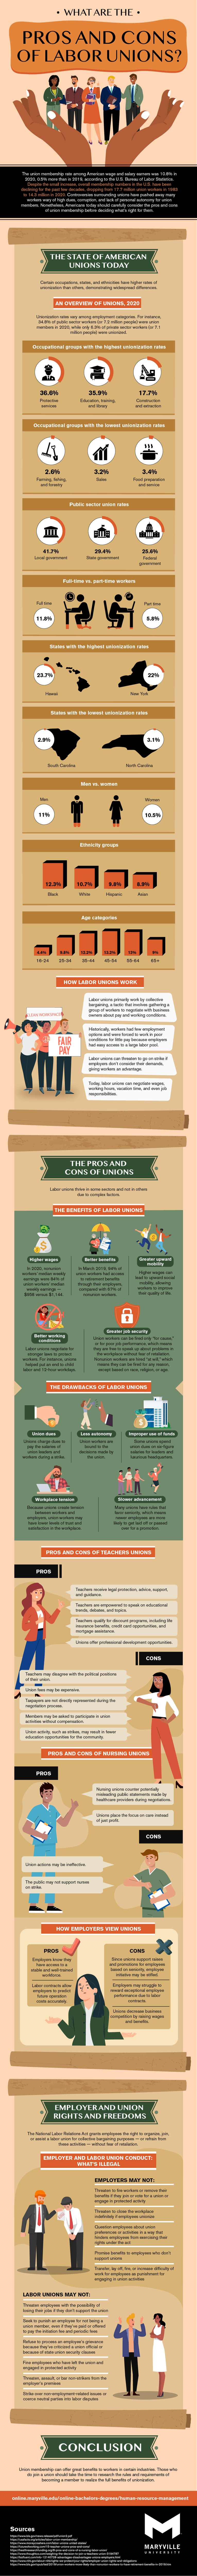 Information on what unions are and their positive and negative attributes.